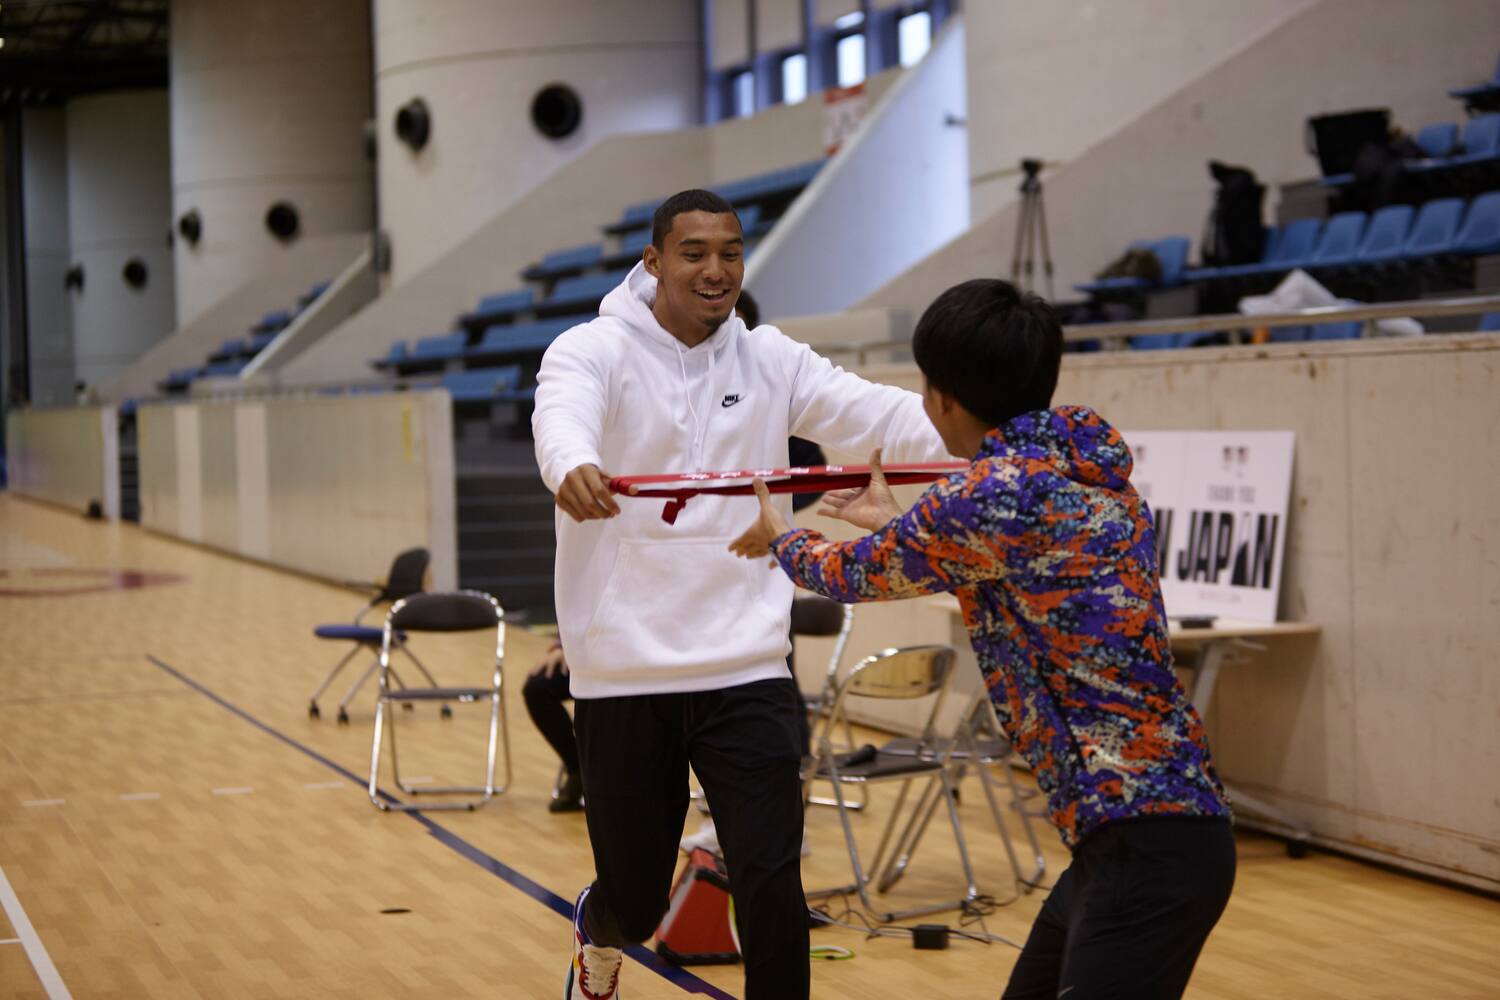 Michael Norman learns how to pass the Tasuki (baton) for the Hakone Ekiden race from a Chuo University student.